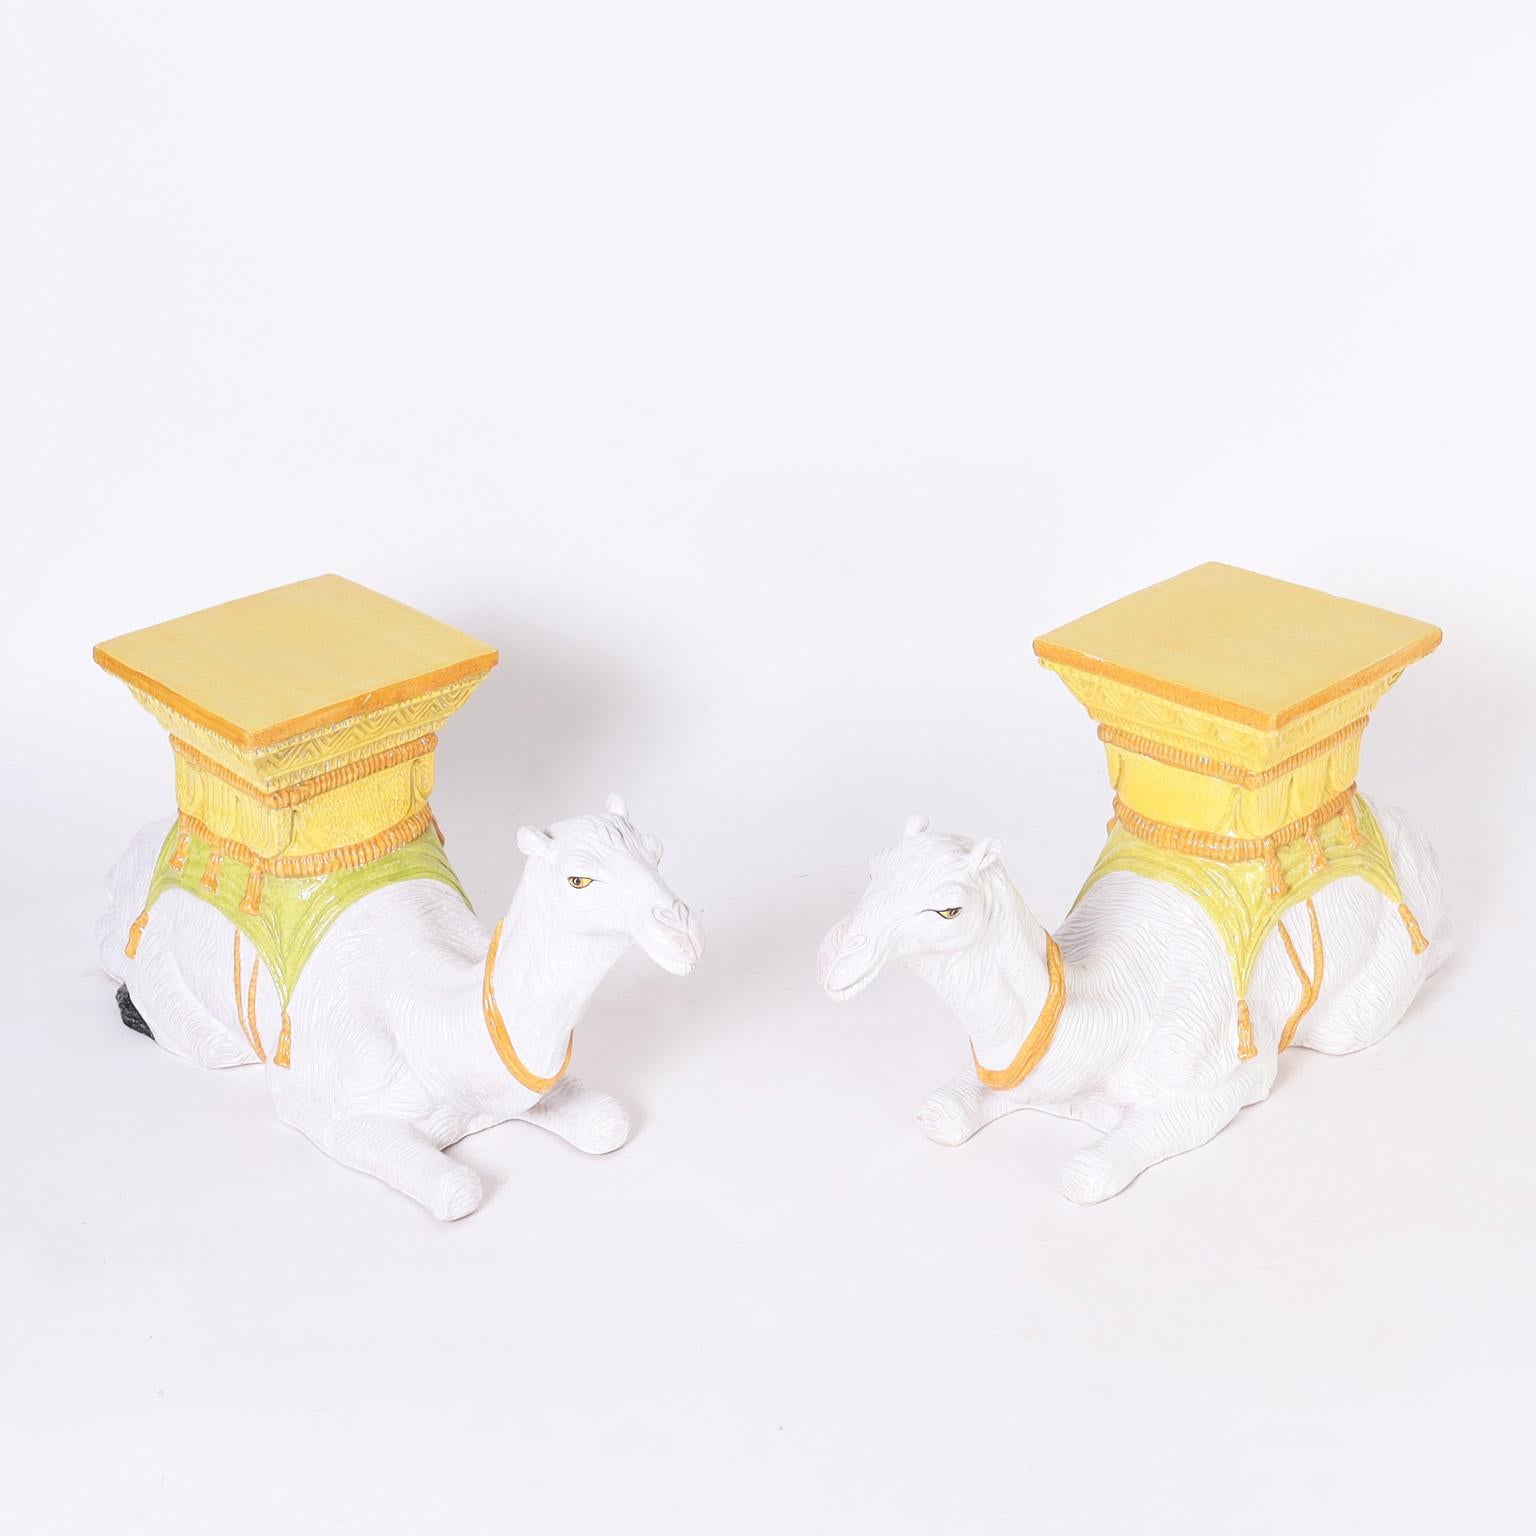 Vintage whimsical stands crafted in terra cotta glazed and decorated with traditional mediterranean colors depicting service camels in repose.